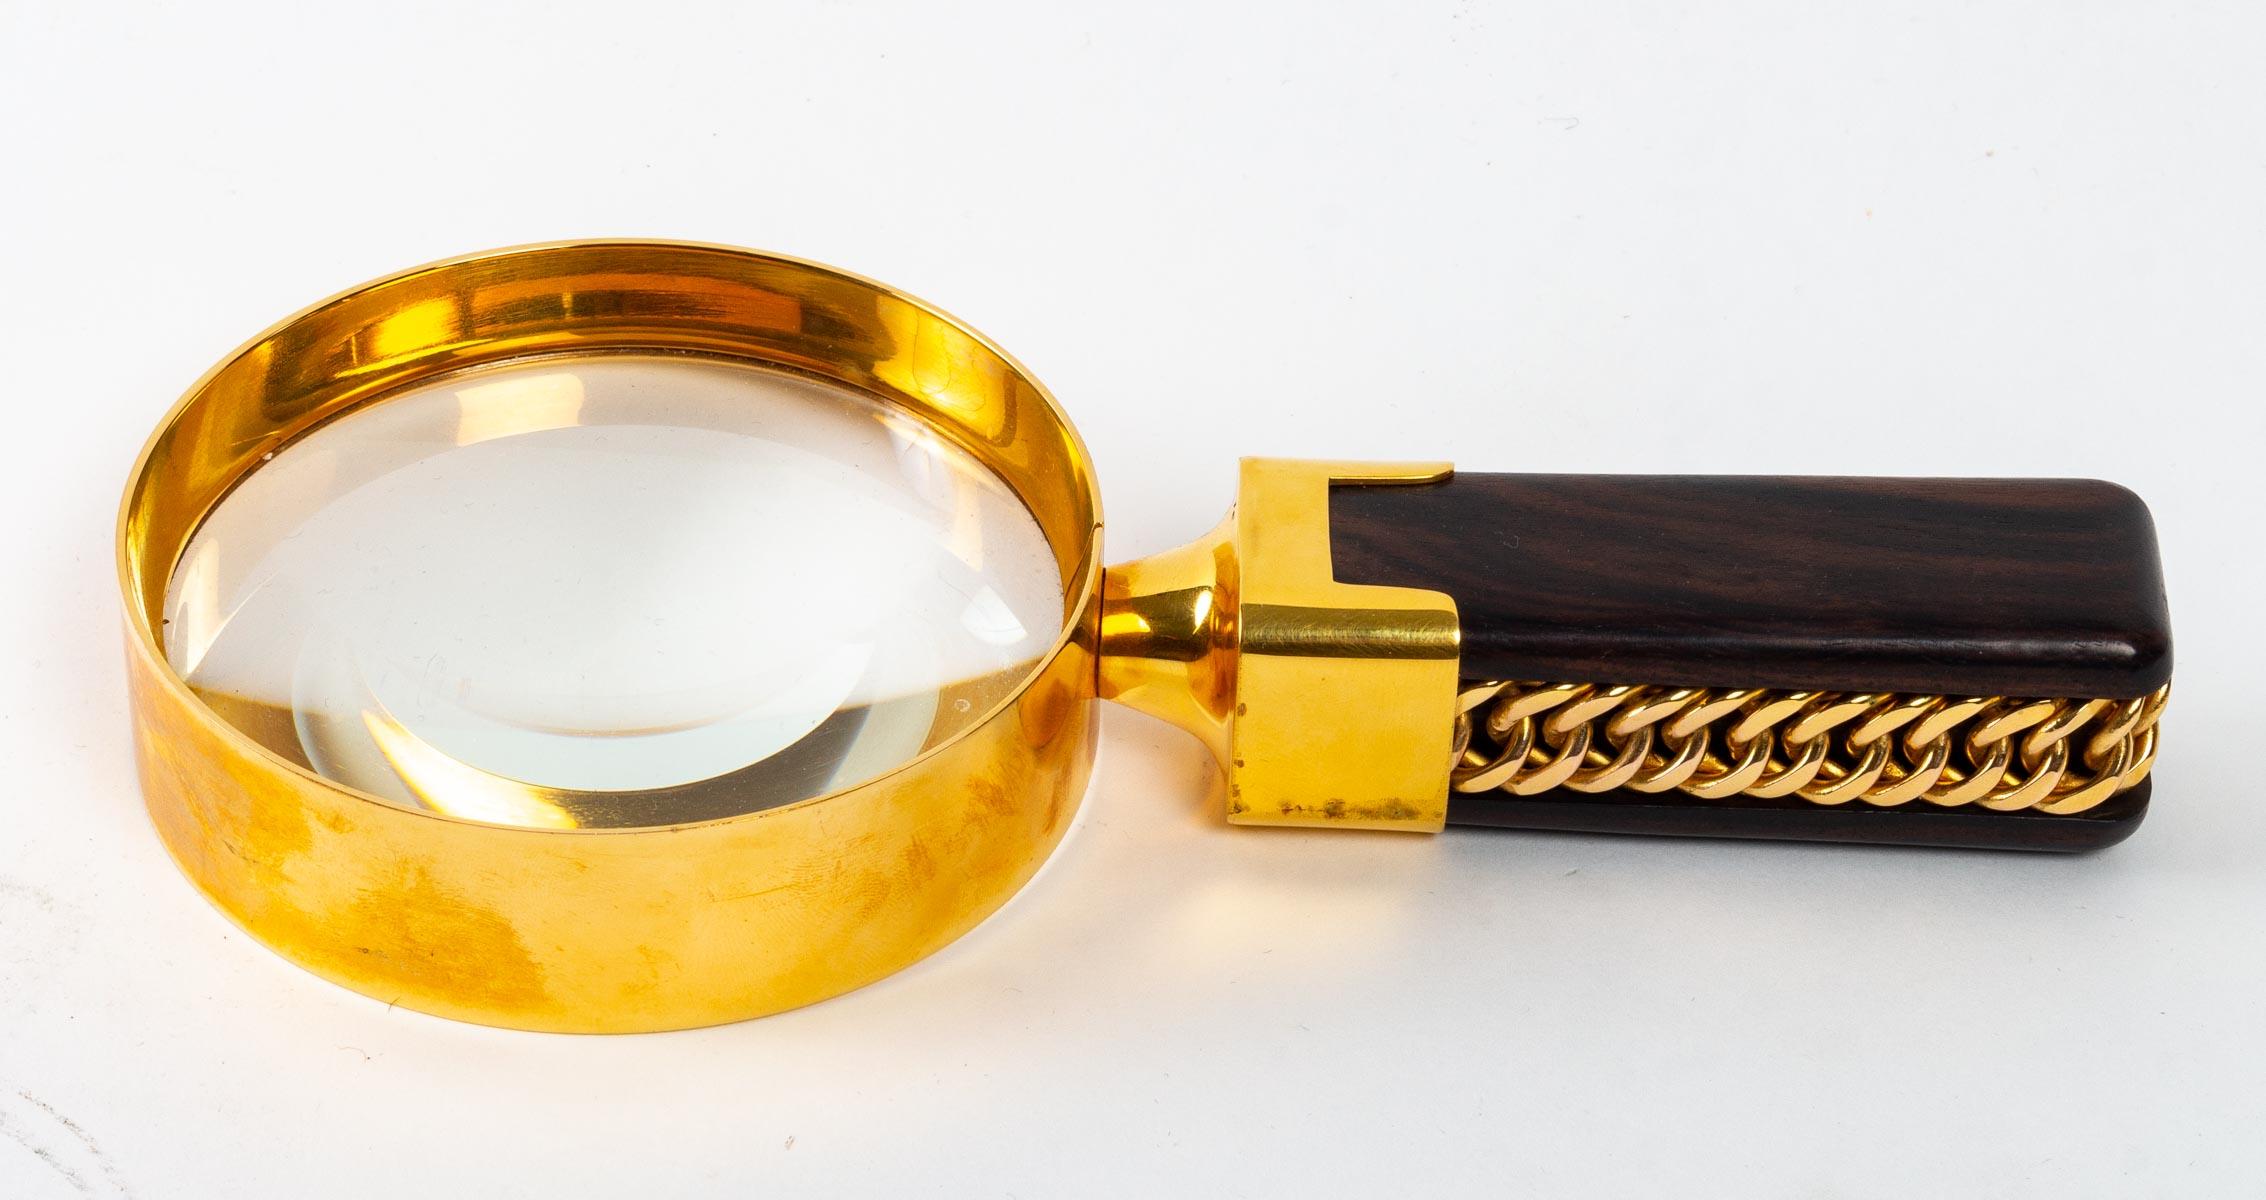 European Magnifier from Hermes